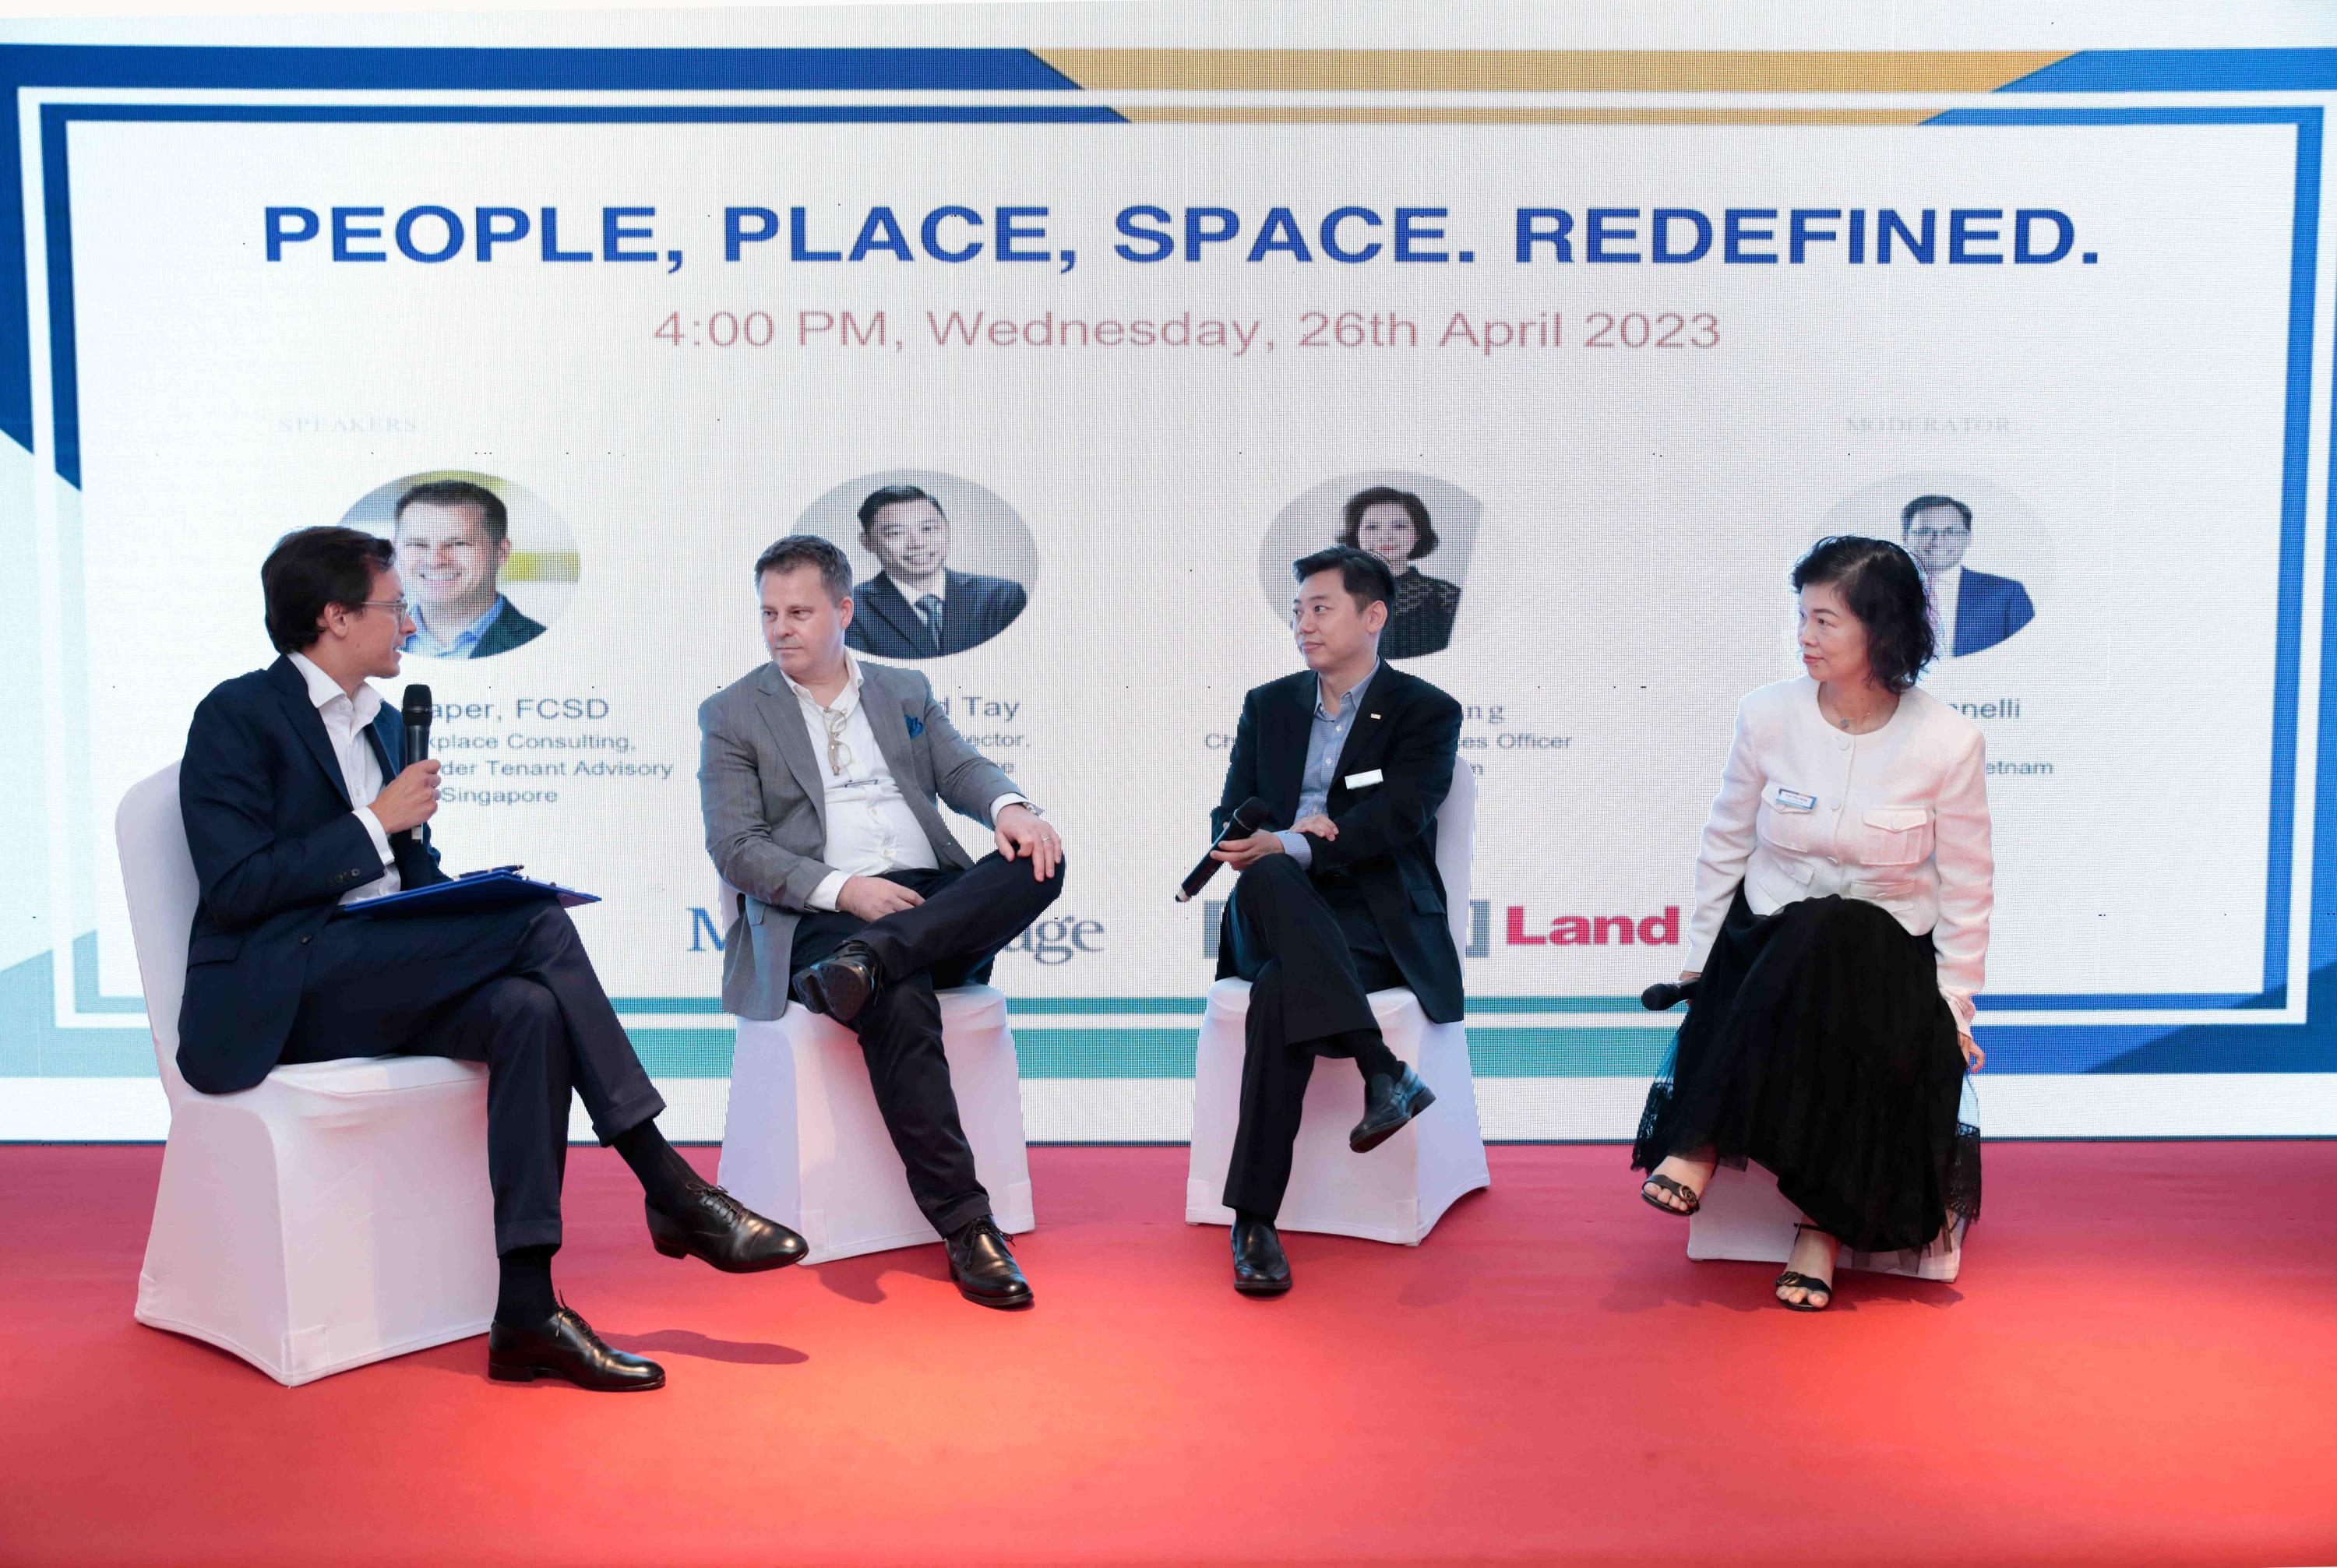 Mr Richard Tay and other panellists at the People, Place, Space. Redefined. event.JPG